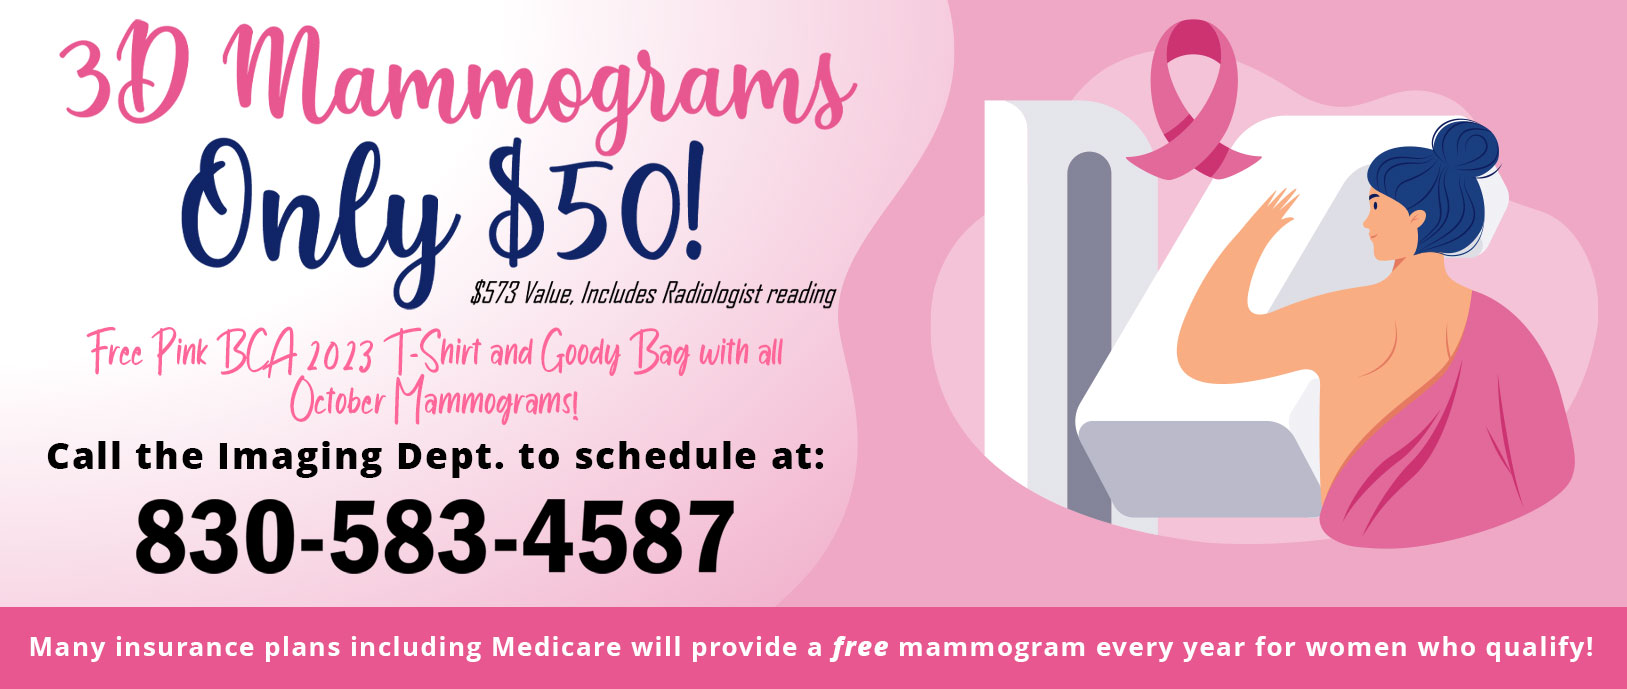 3D Mammograms
Only $50!
$573 Value, Includes Radiologist reading

Free pink BCA 2023 T-shirt and Goody Bag with all October Mammograms!

Call the Imaging Dept. to schedule at:

830-583-4587

Many insurance plans including Medicare will provide a free mammogram every year for women who qualify!